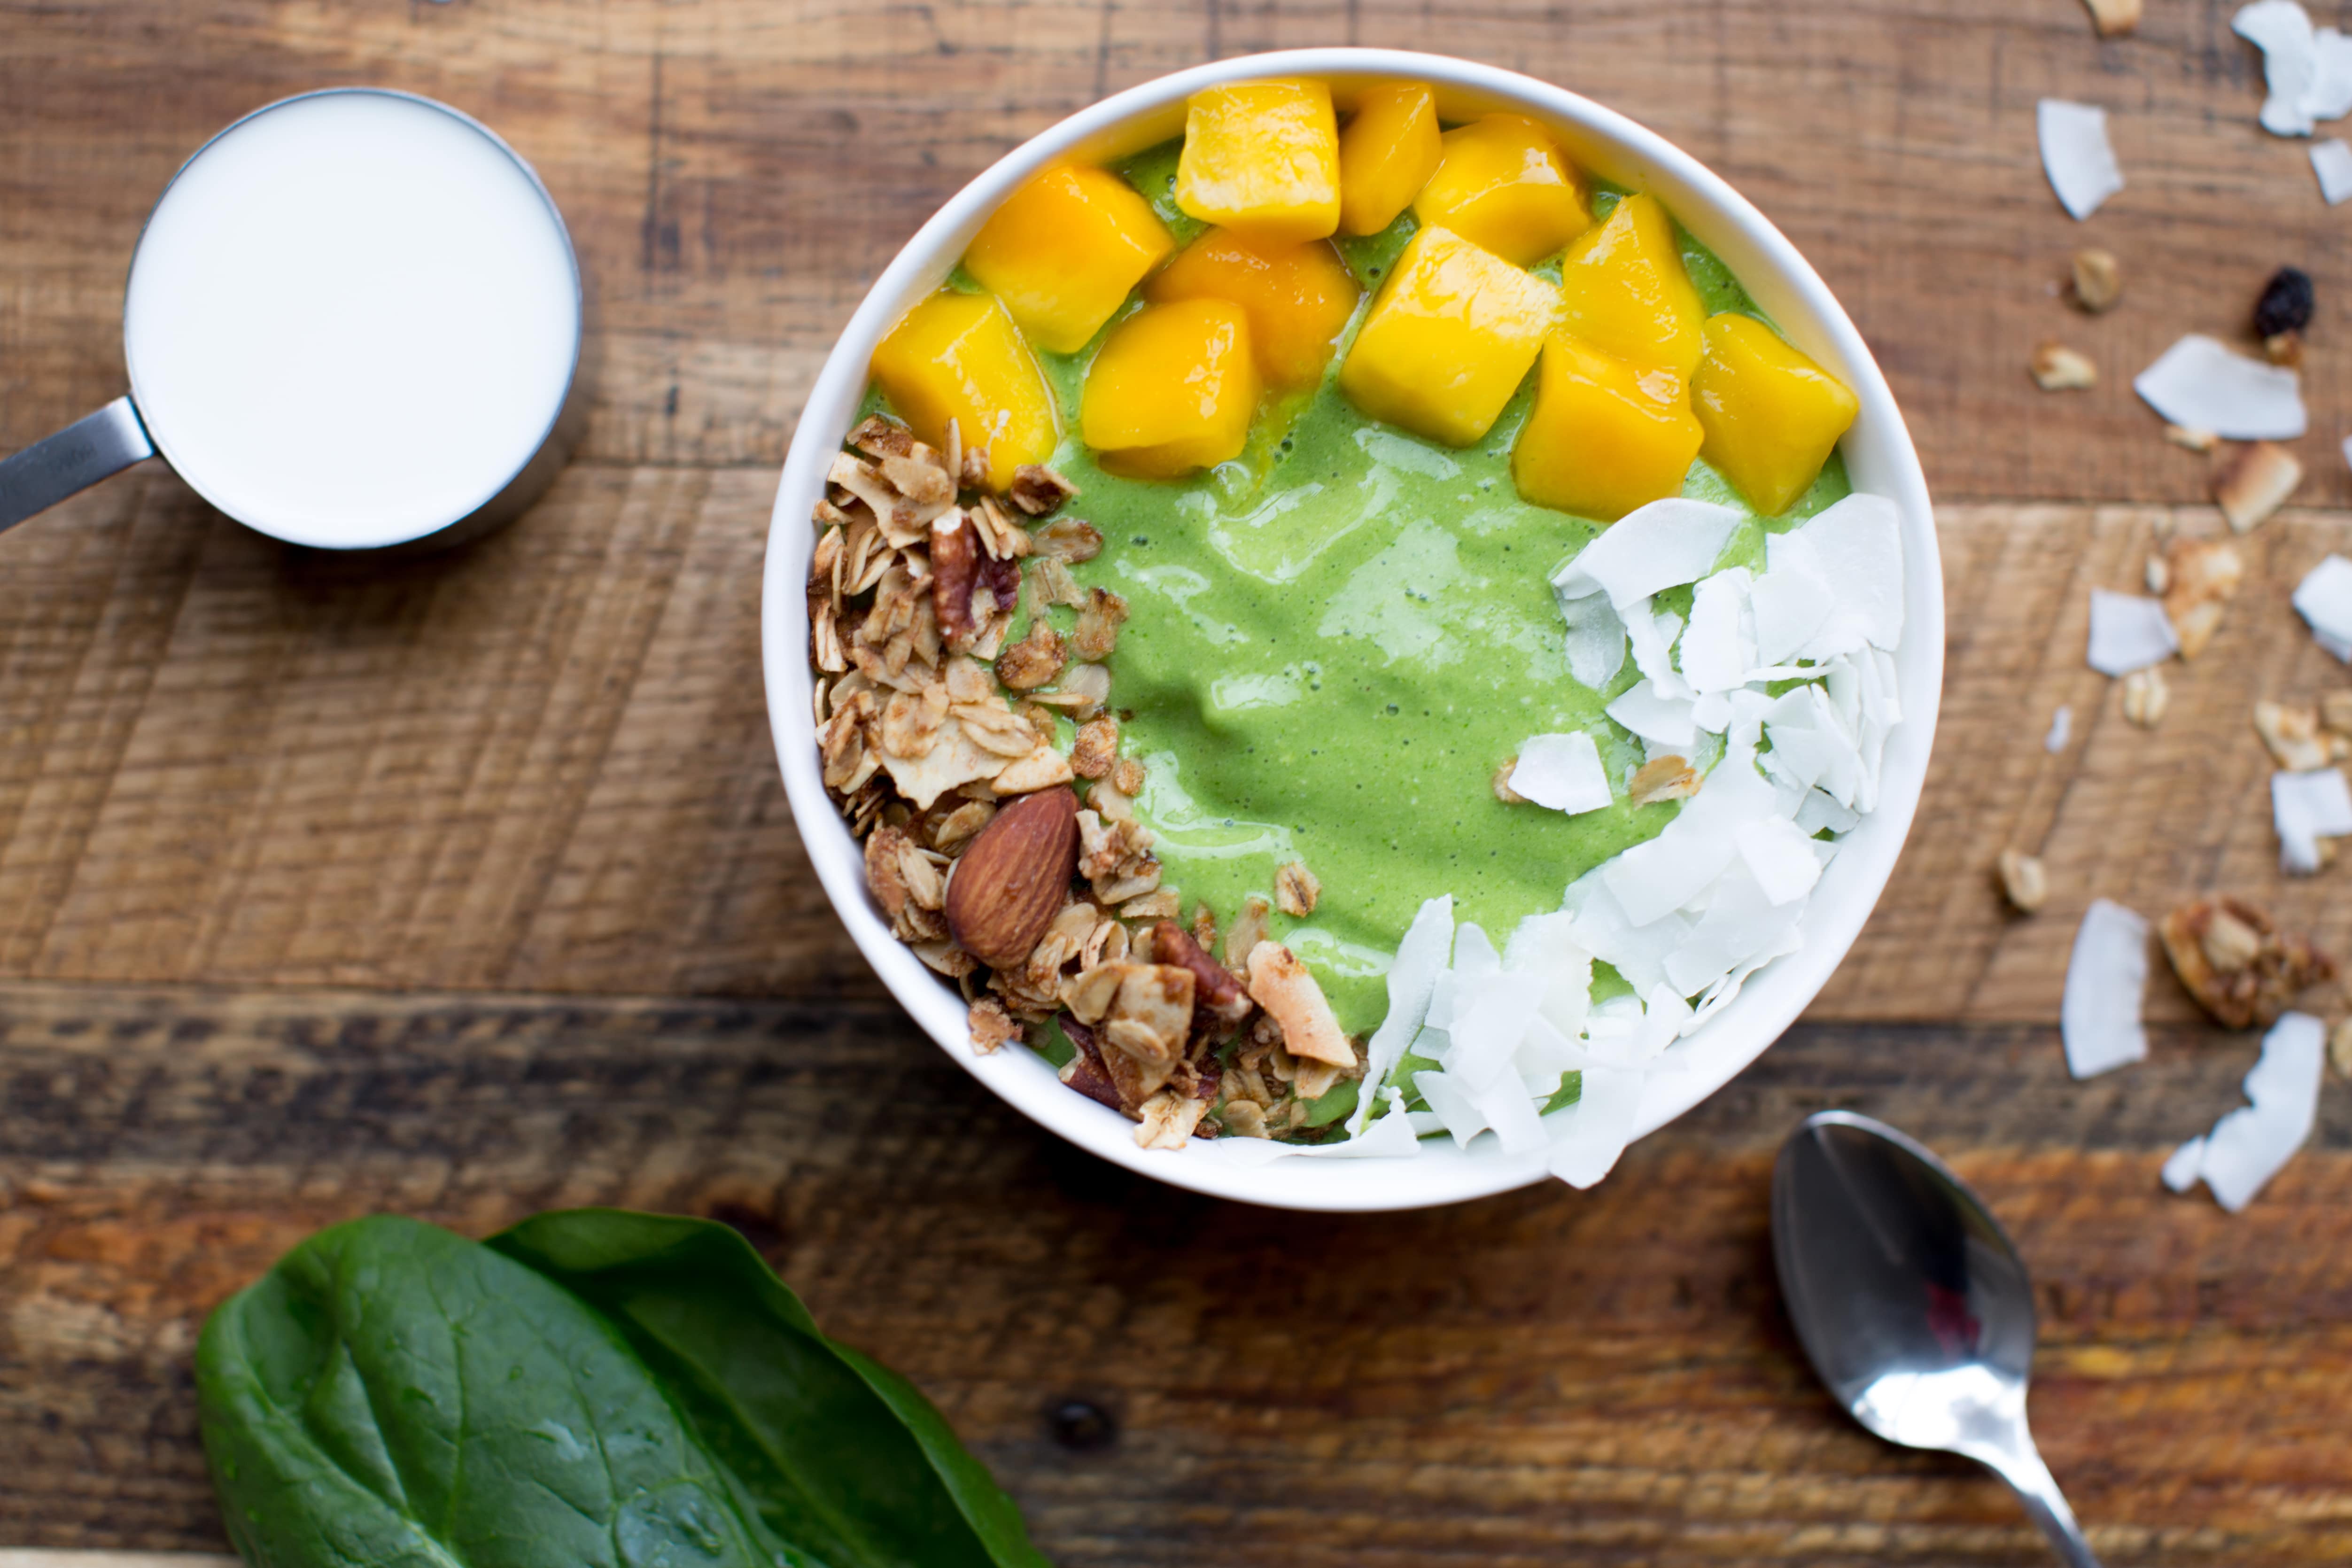 Tropical Green Smoothie Bowl